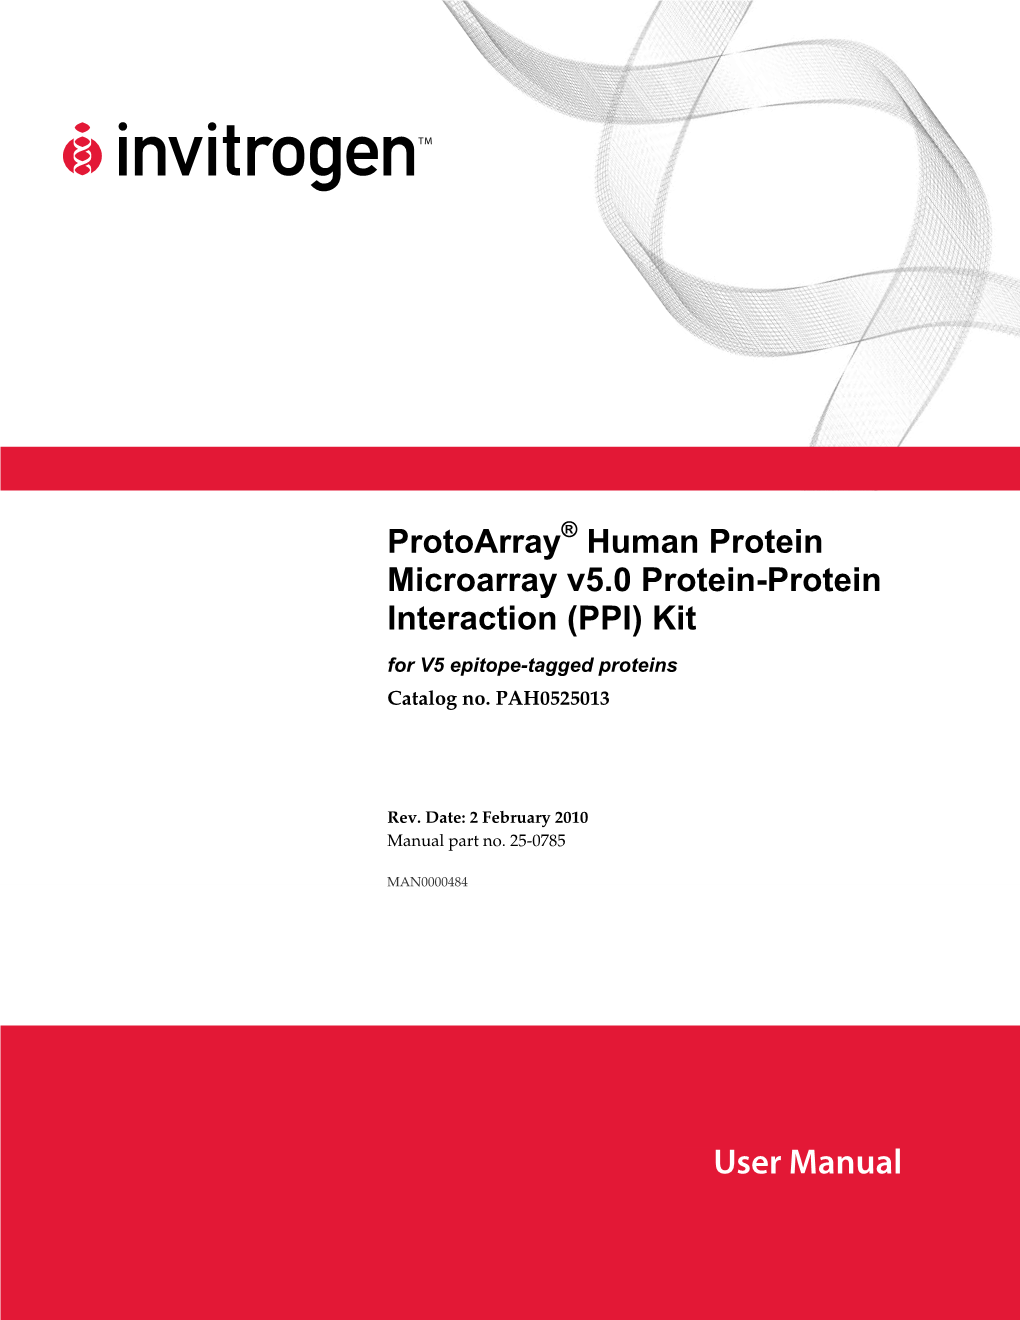 Protoarray® Protein Microarray PPI Kits for V5 Epitope-Tagged Proteins